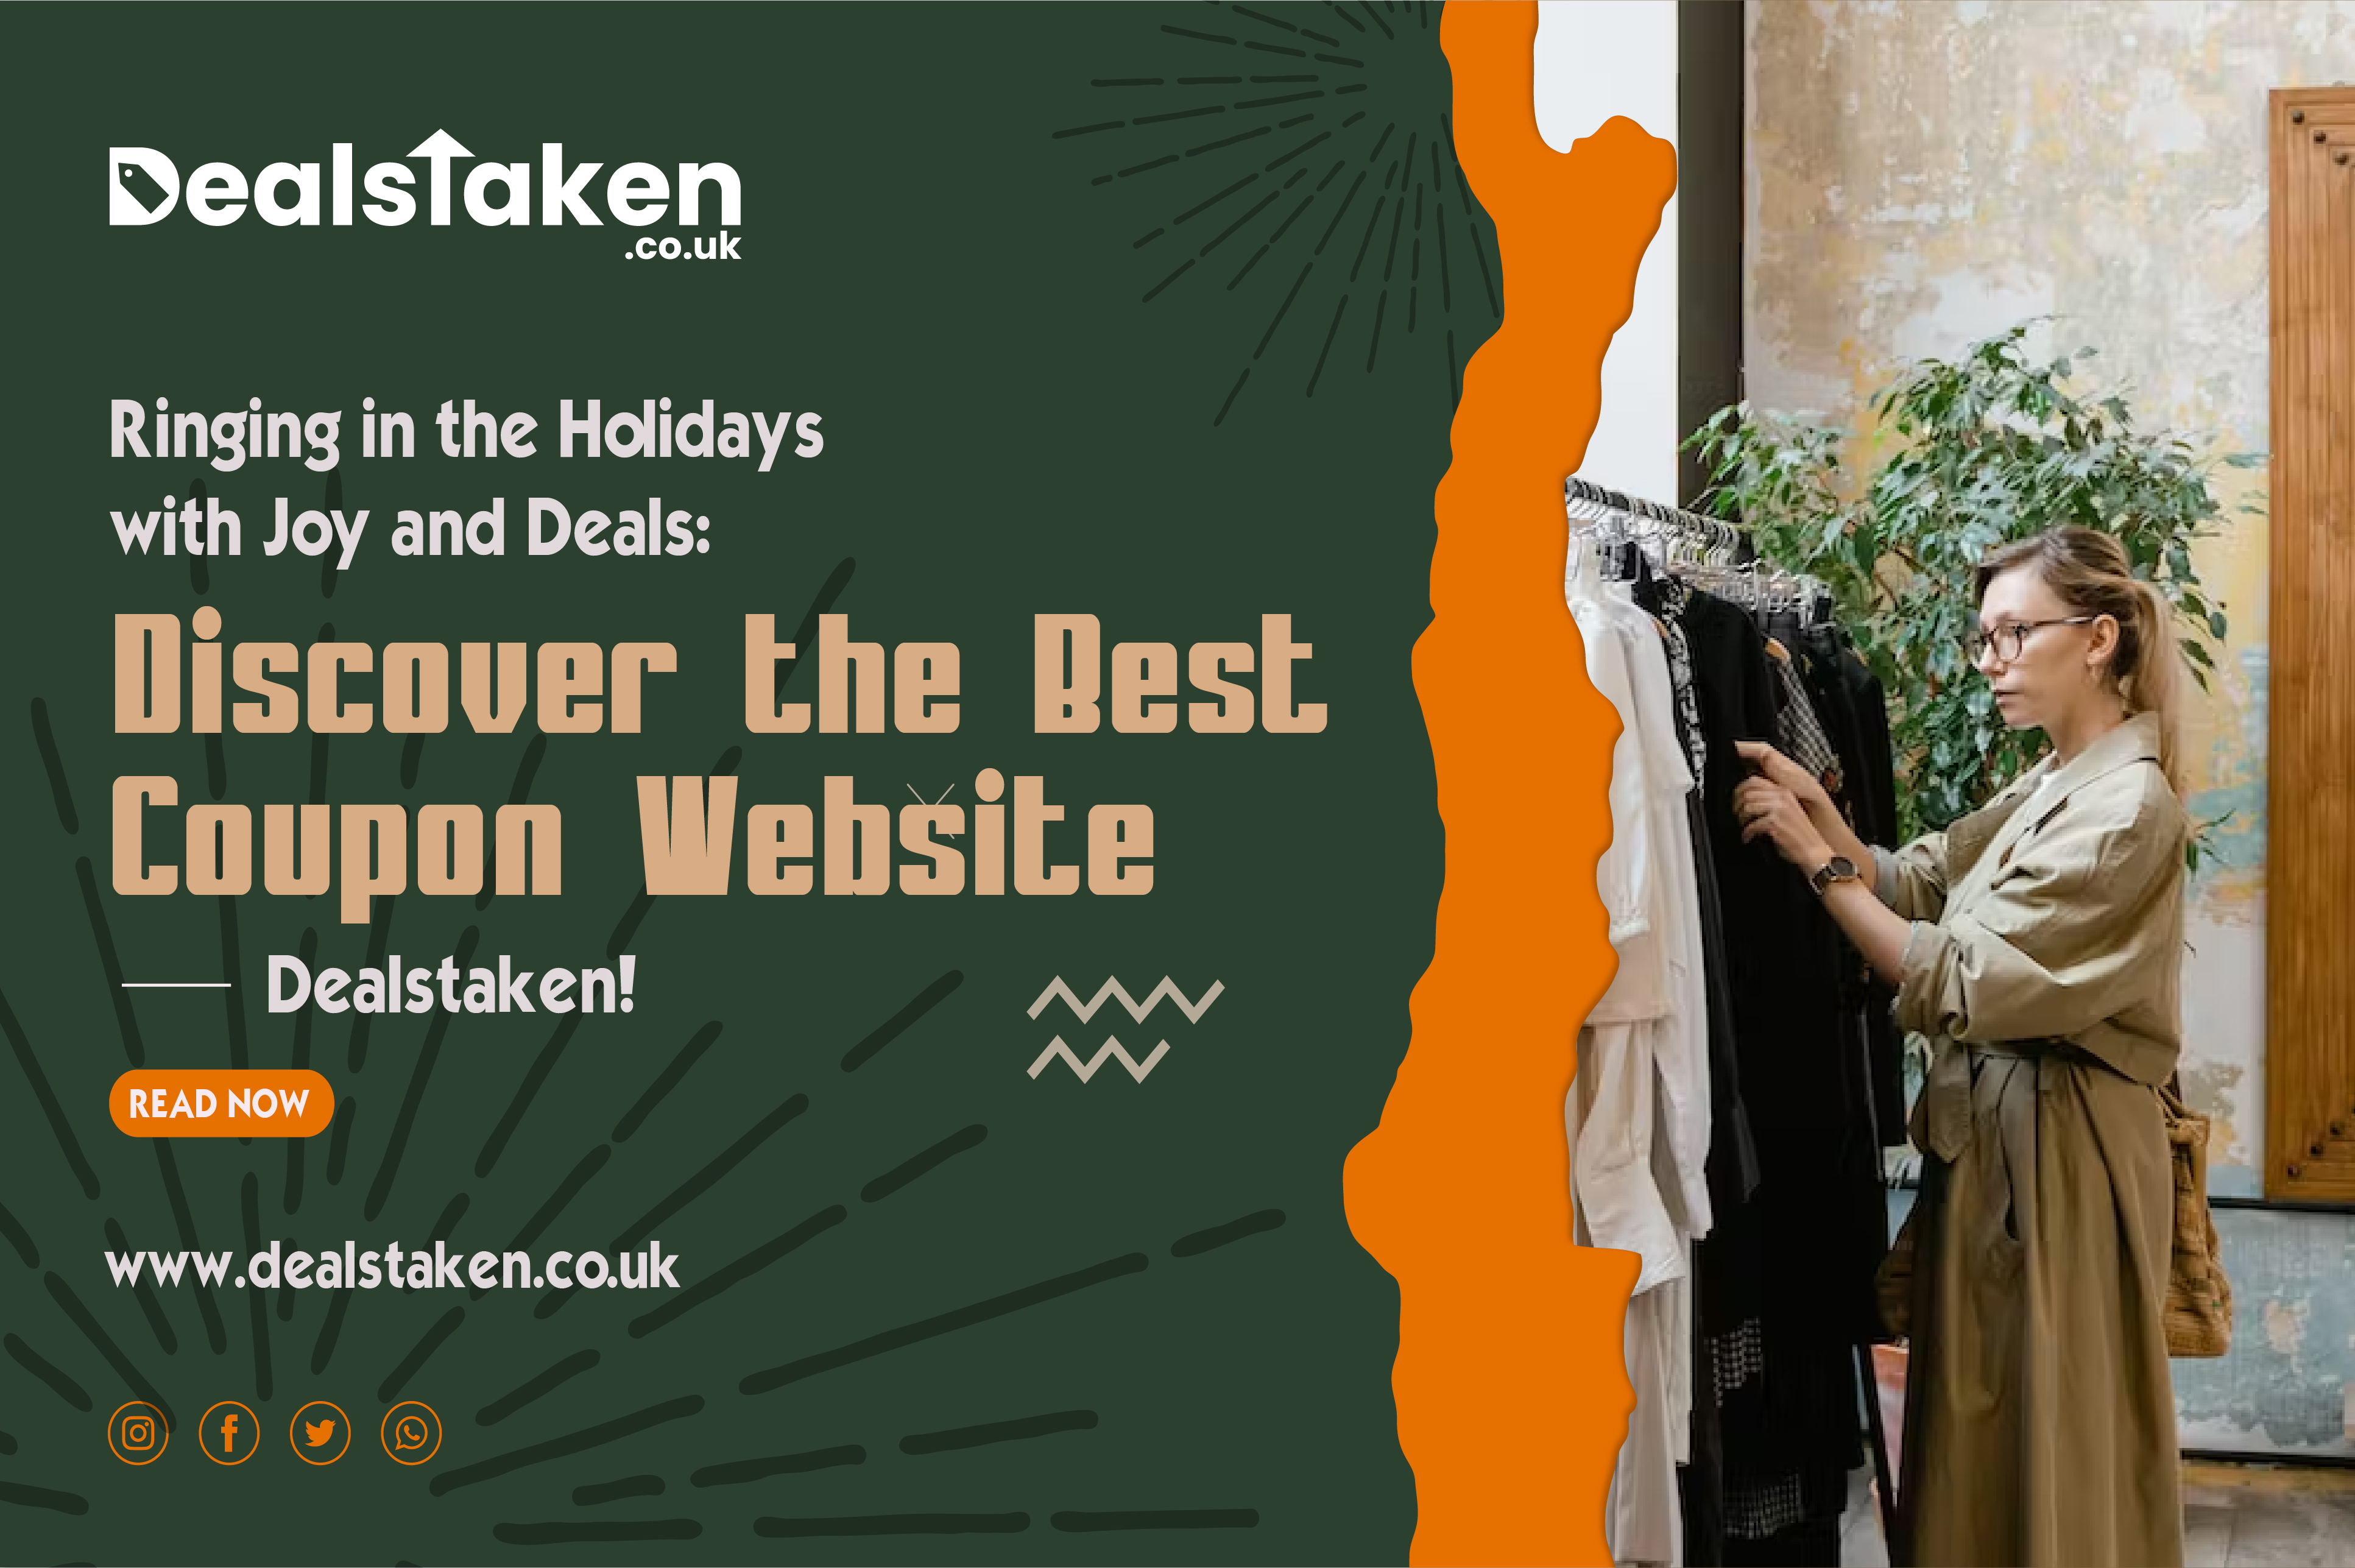 ringing-in-the-holidays-with-joy-and-deals-discover-the-best-coupon-website-dealstaken